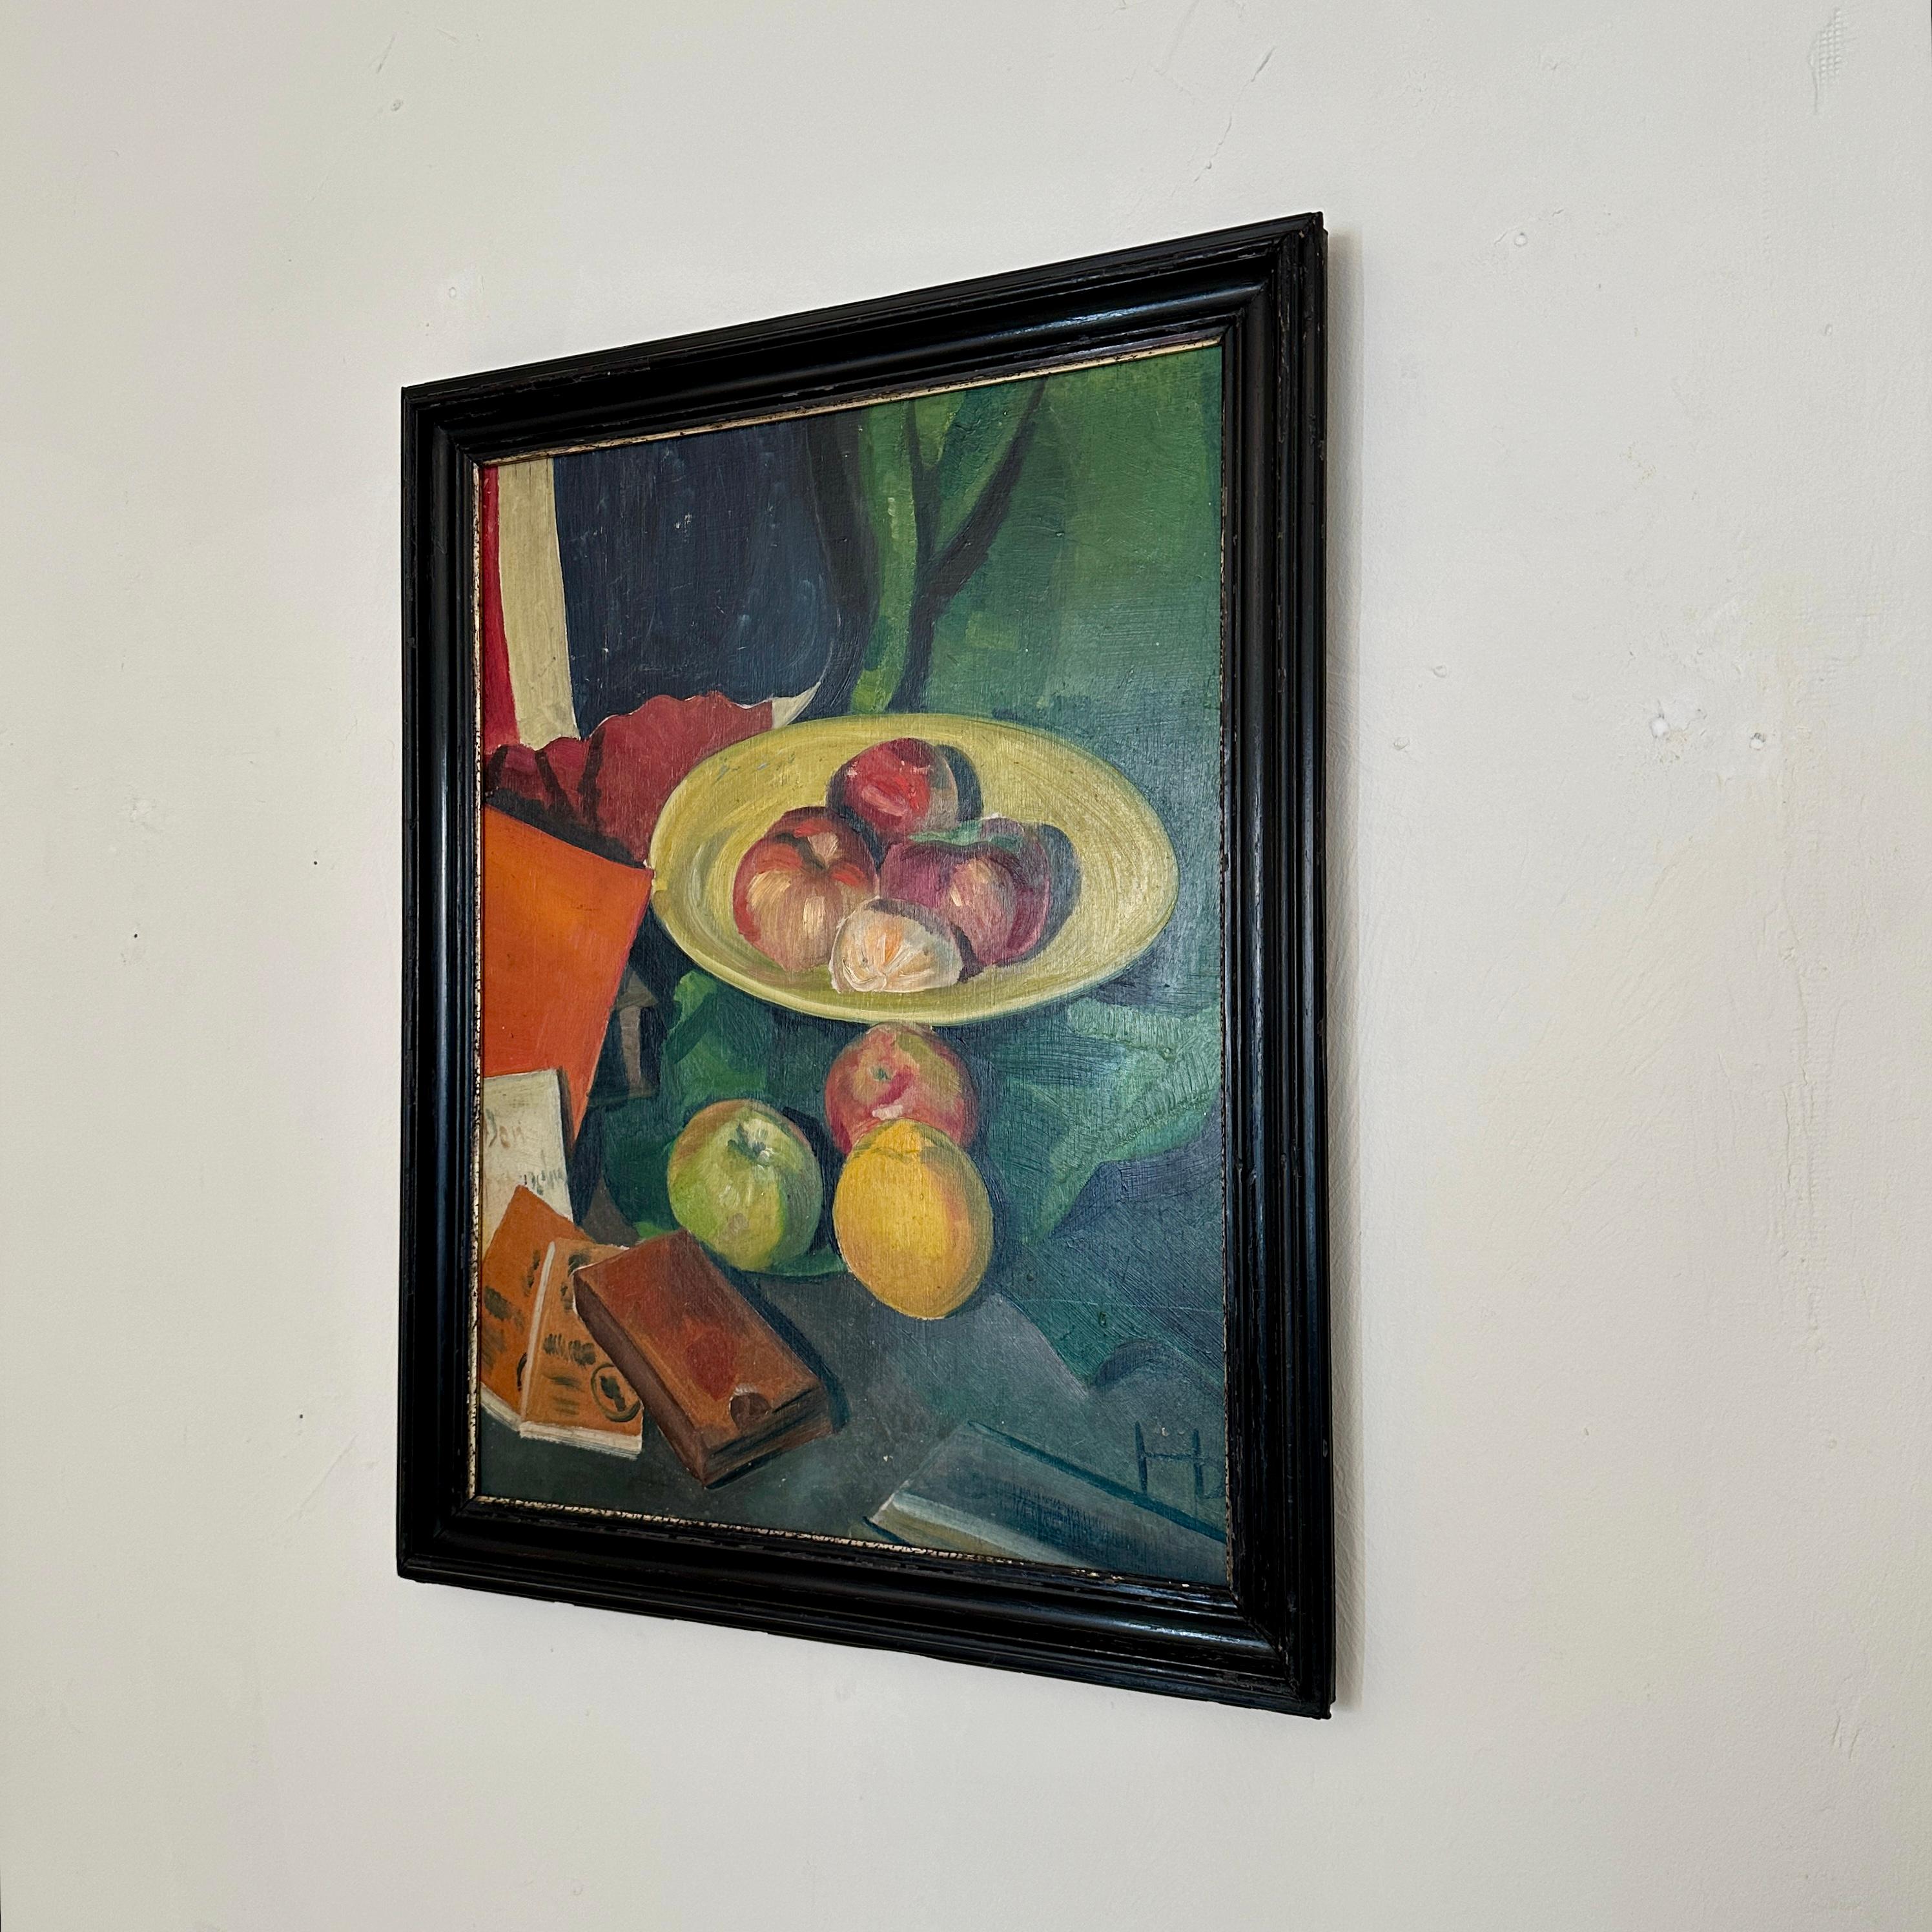 Pine 1920s Naive Still Life Oil Painting with Fruits and Books in a Black Frame For Sale